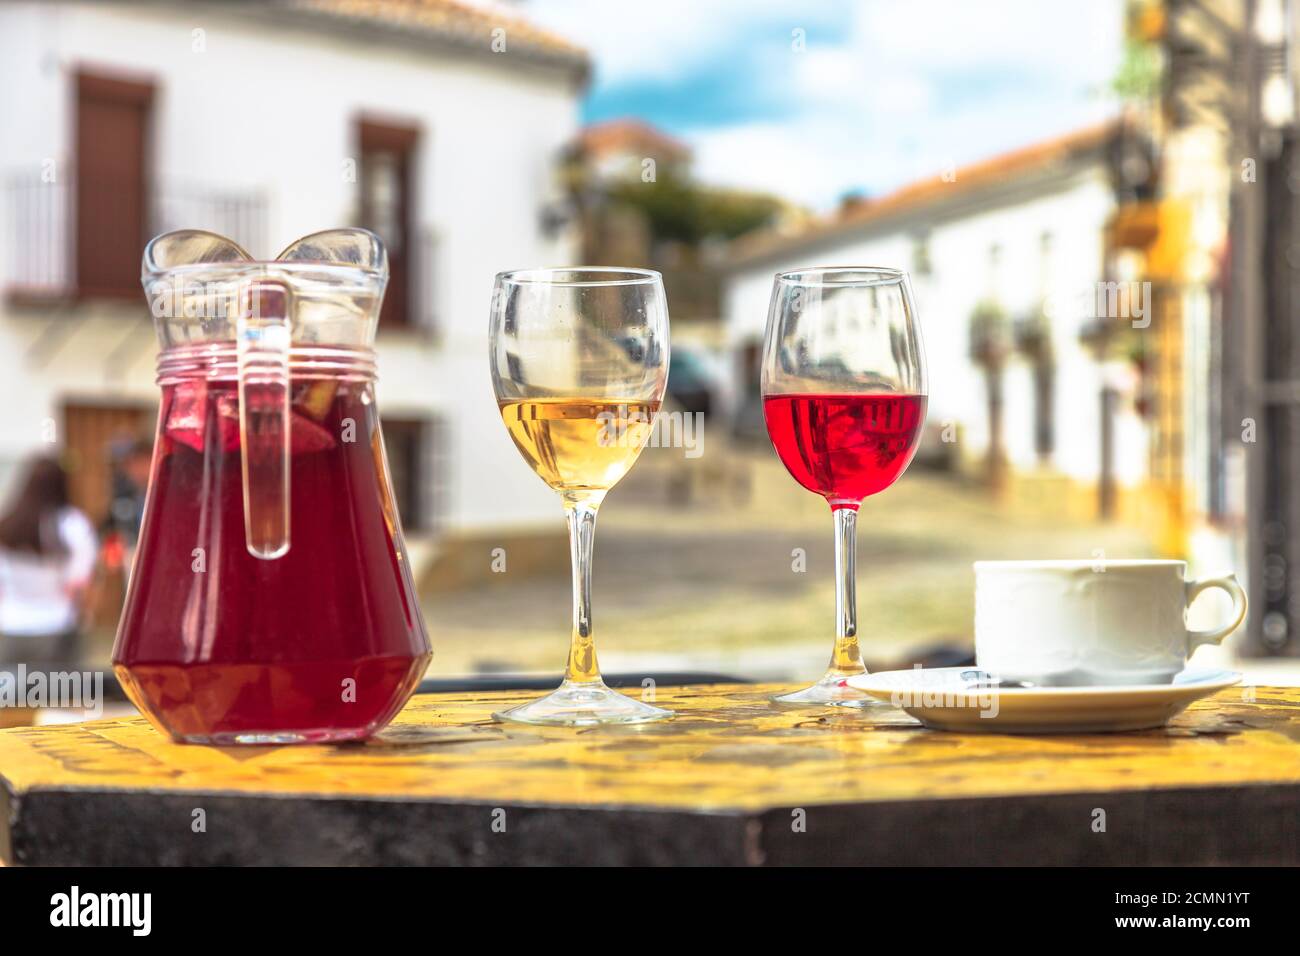 https://c8.alamy.com/comp/2CMN1YT/pitcher-of-sangria-with-coffee-cup-and-red-and-white-glasses-of-wine-on-a-blurred-spanish-countryside-background-in-spain-2CMN1YT.jpg